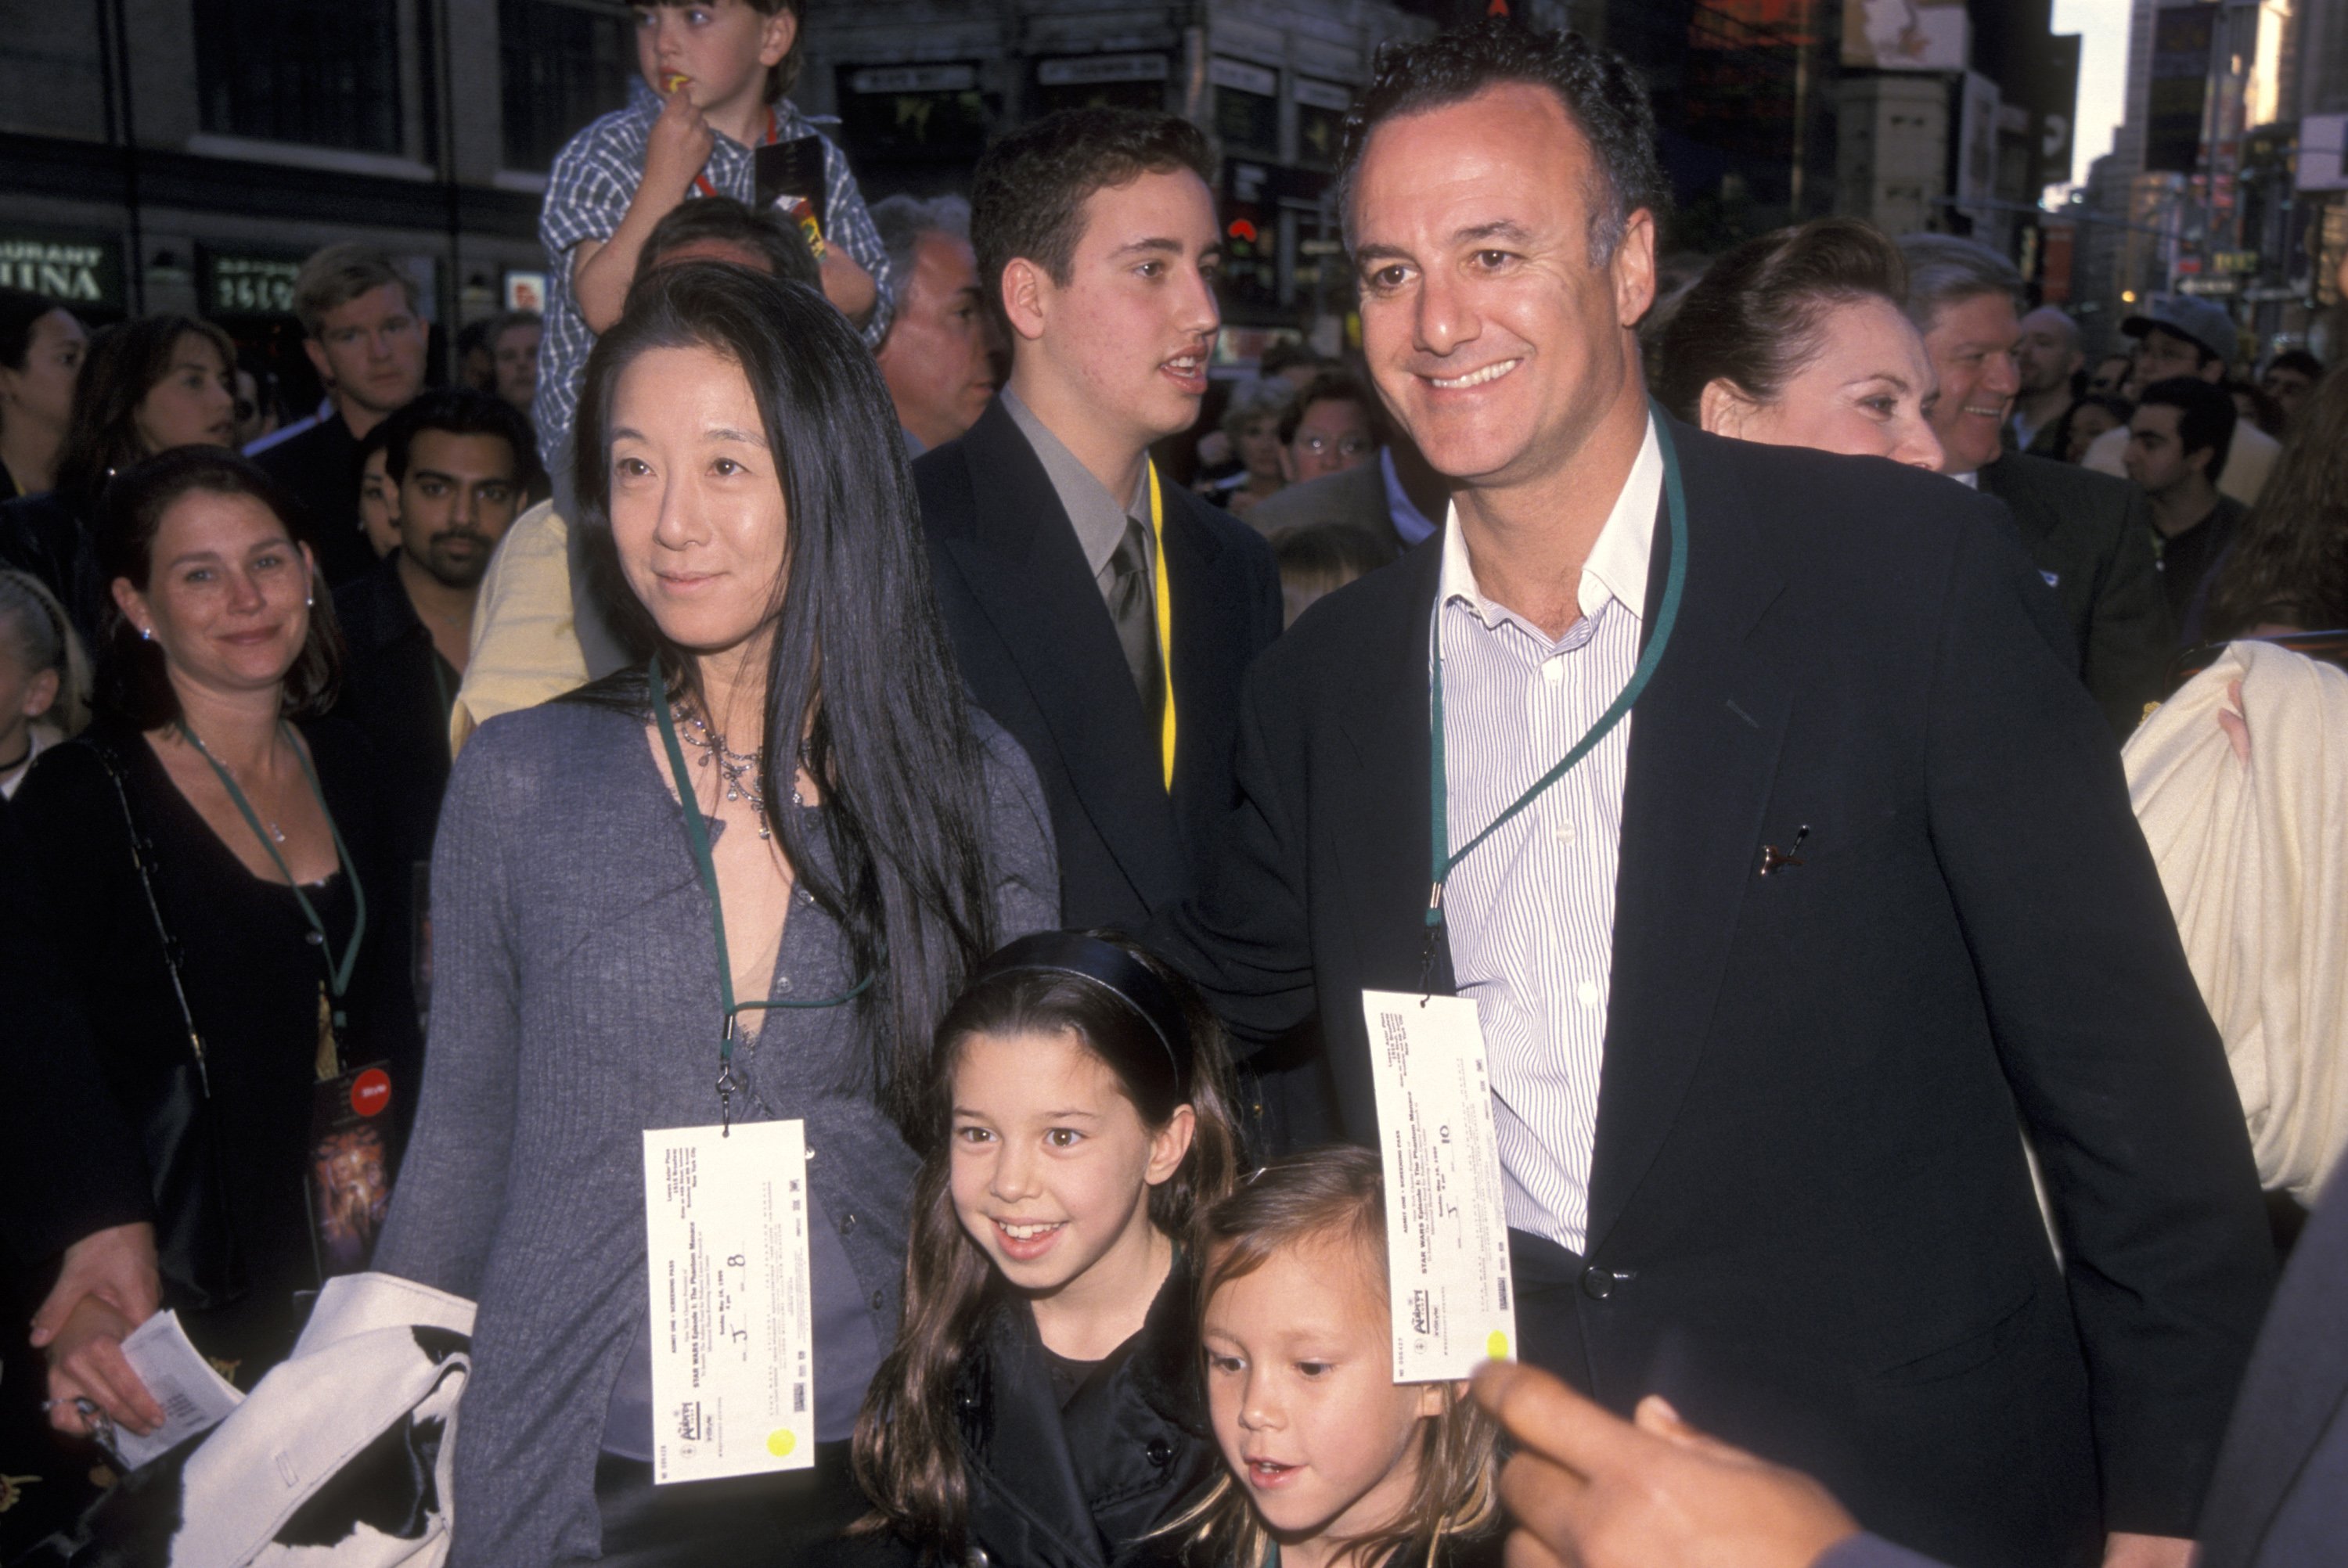 Vera Wang, Arthur Beck, Cecilia Becker and Josephine Becker at the "Star Wars Episode I: The Phantom Menace" New York City Premiere on May 16, 1999 | Source: Getty Images